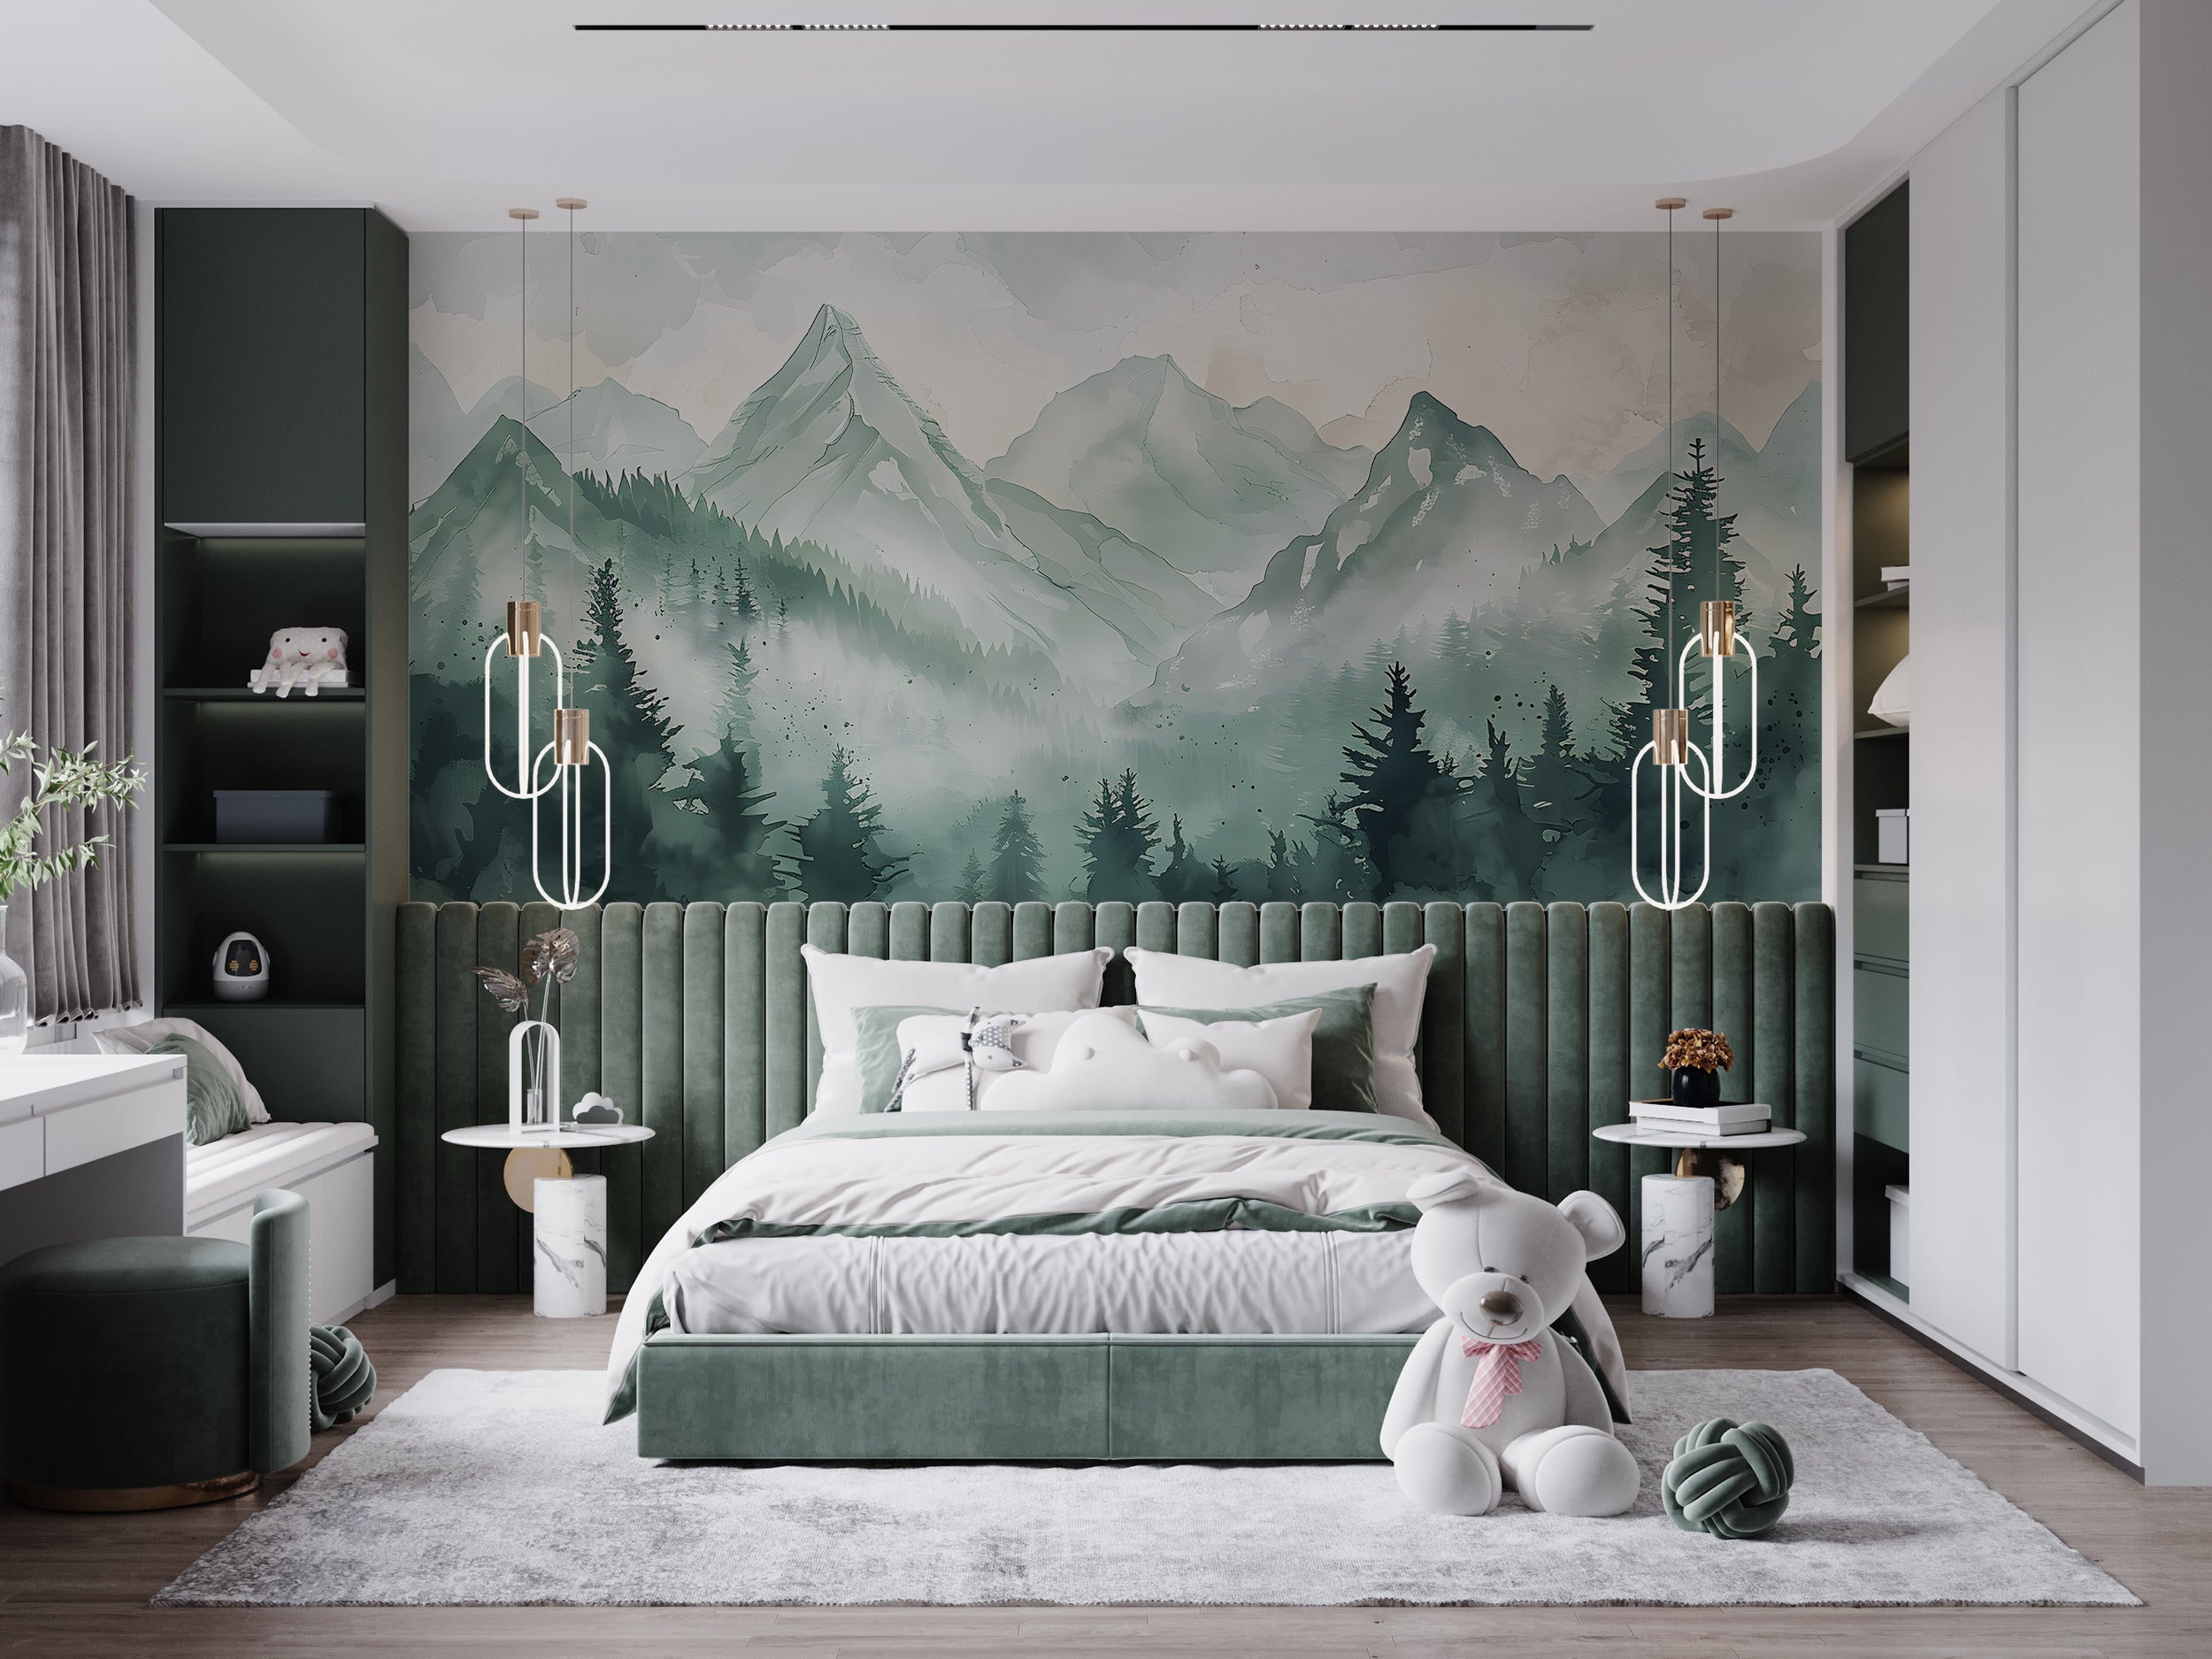 Soft Green Mountains Wallpaper, Watercolor Wild Forest Mural, Self-adhesive Removable Pastel Green Foggy Mountain Landscape Decor